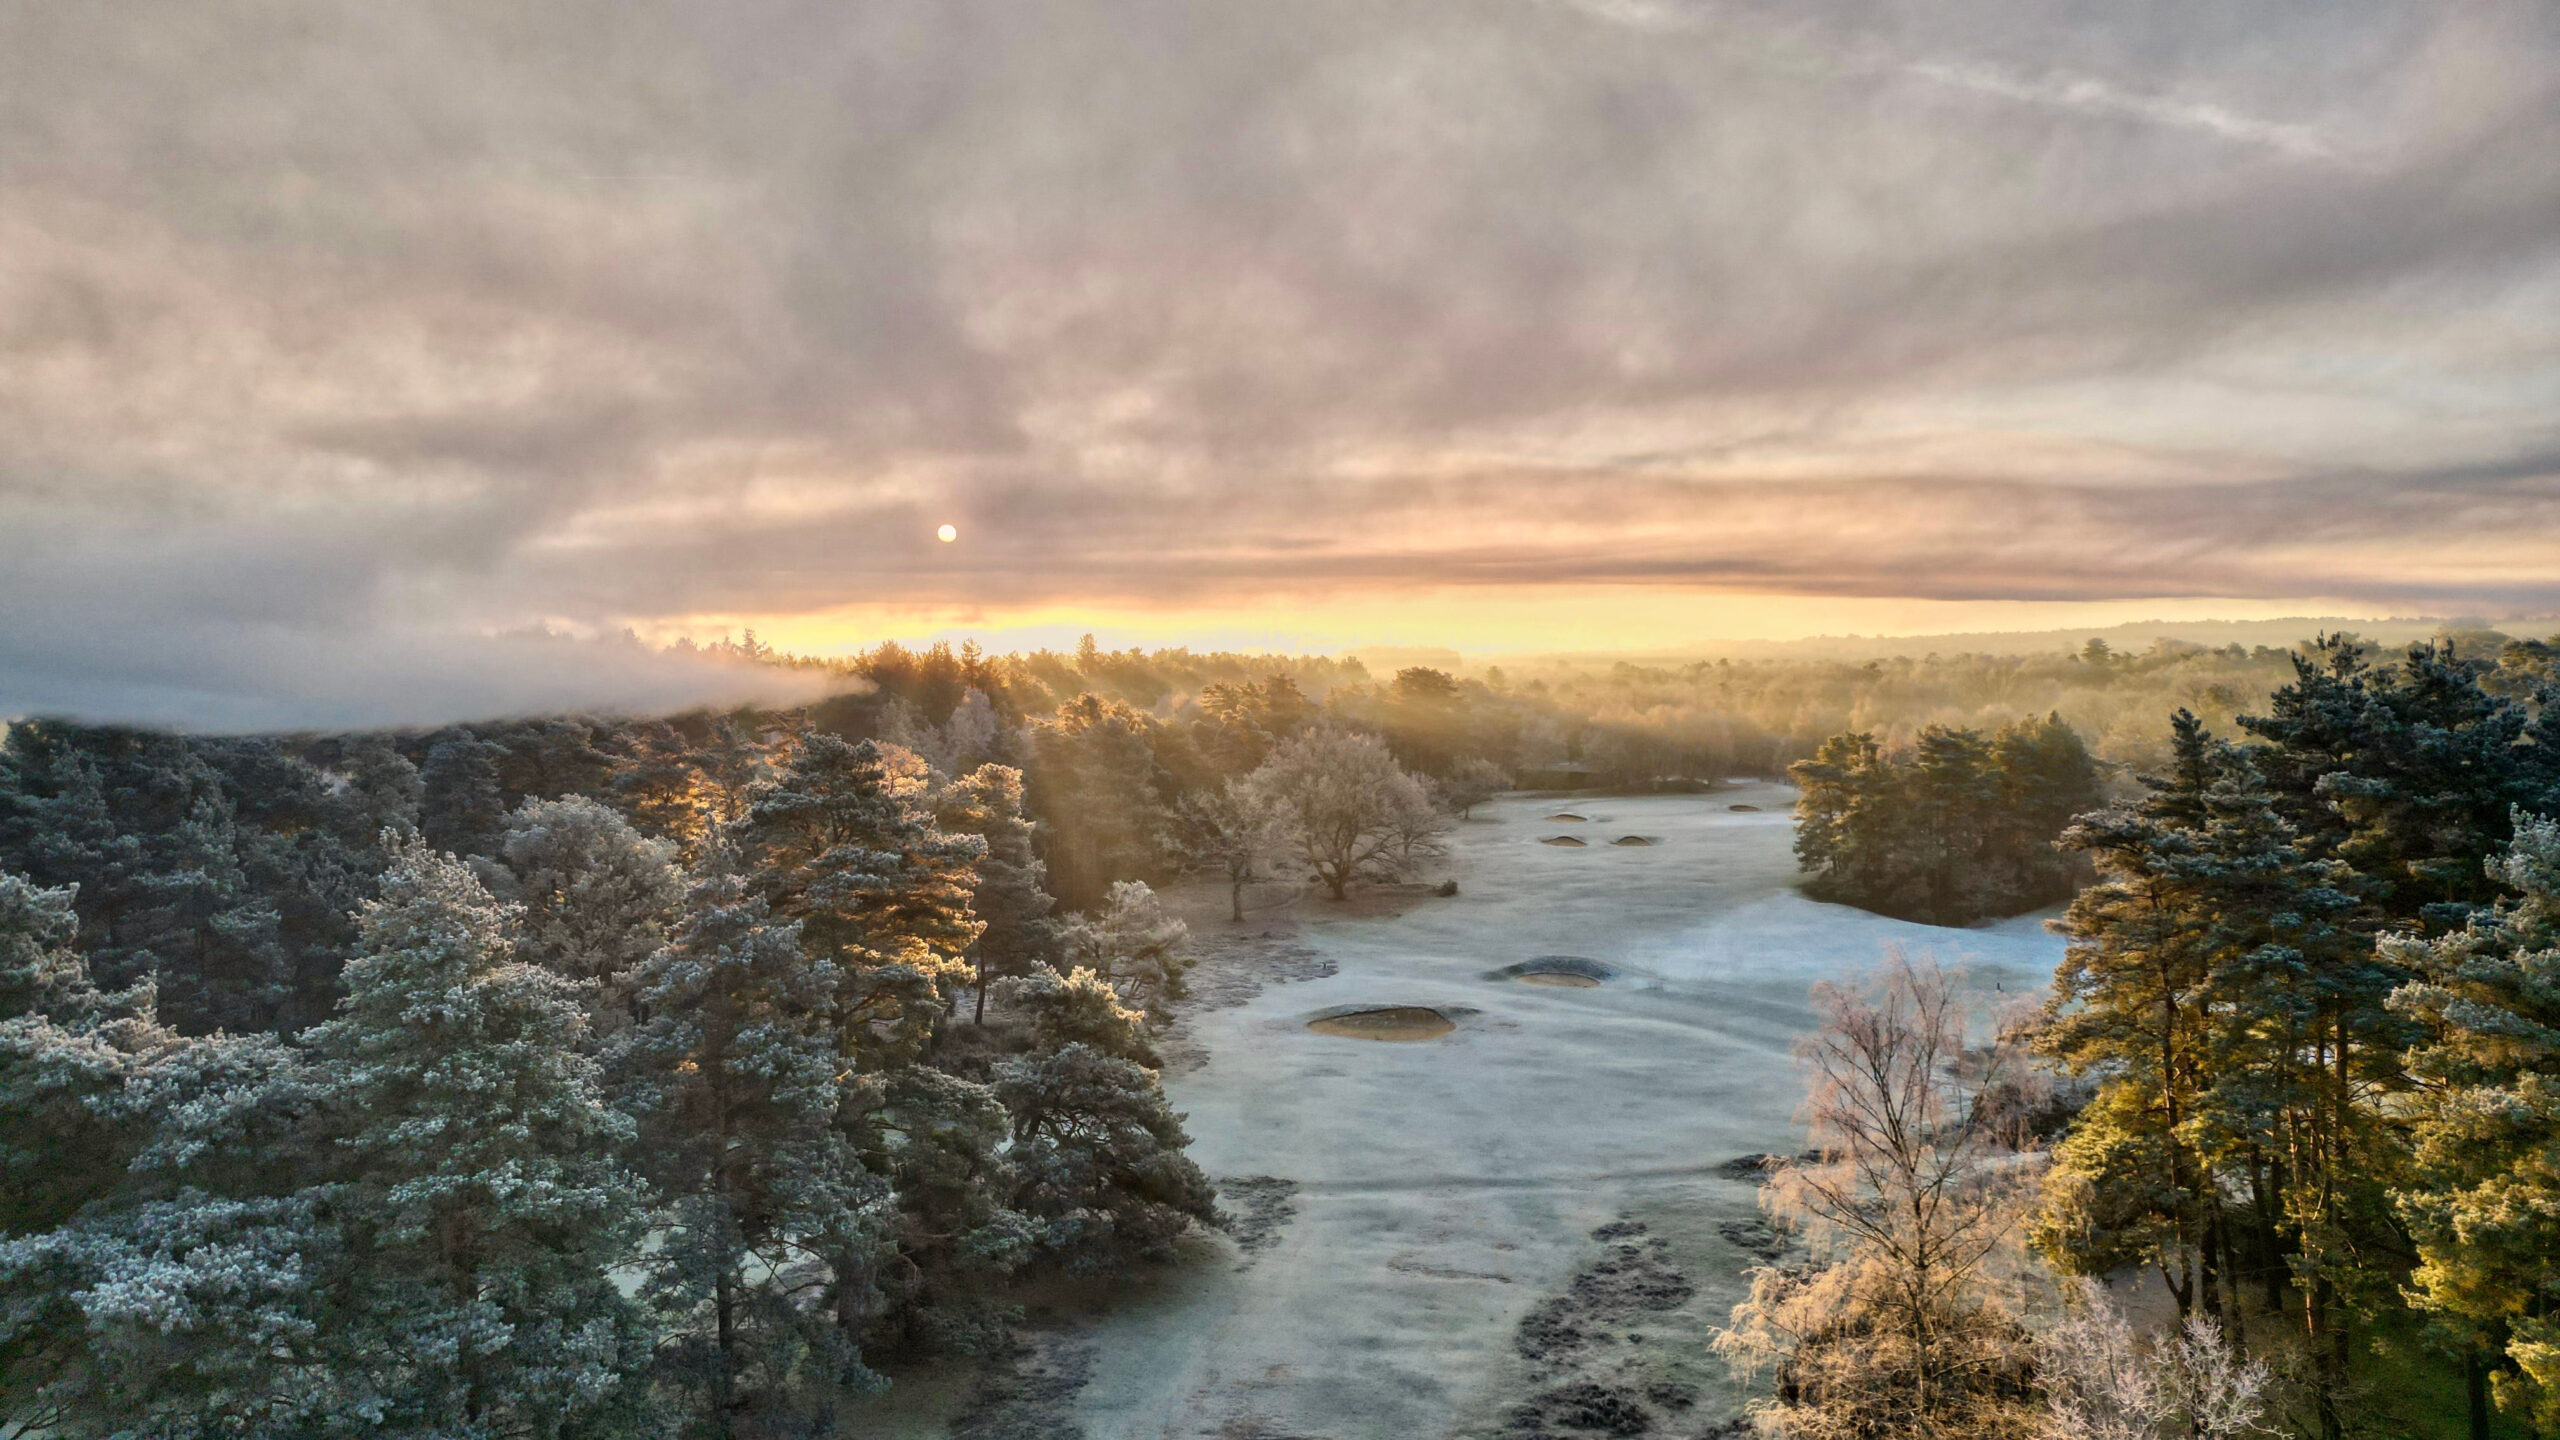 01 David Ball’s image of a winter sunrise over Thetford is the overall competition winner